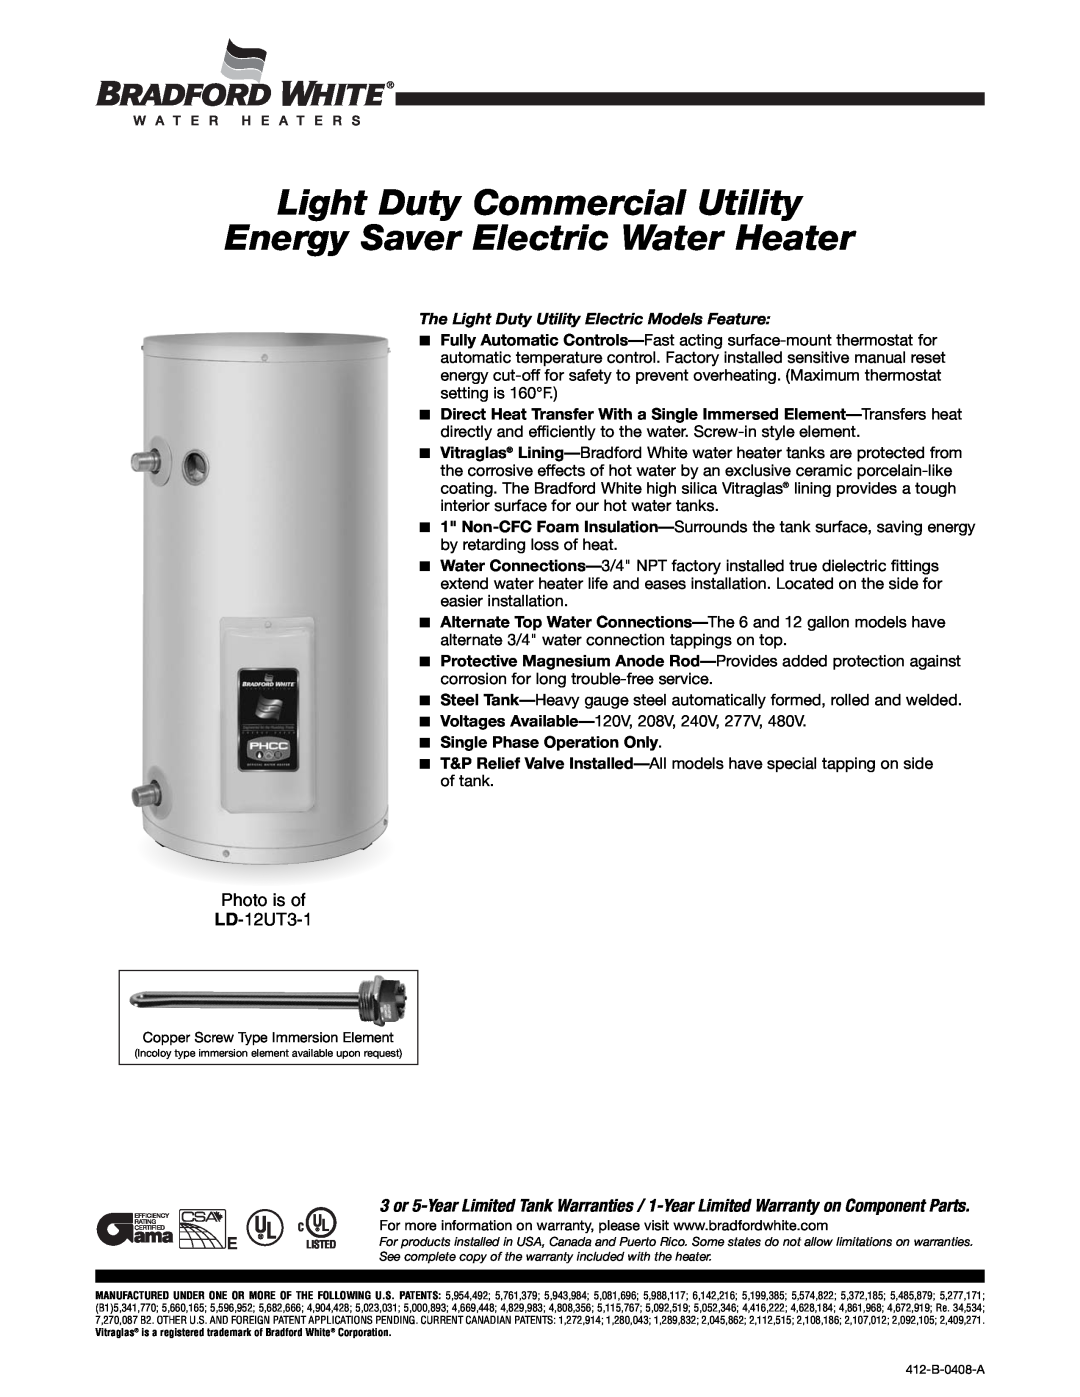 Bradford-White Corp LD-12UT3-1 warranty Light Duty Commercial Utility Energy Saver Electric Water Heater 